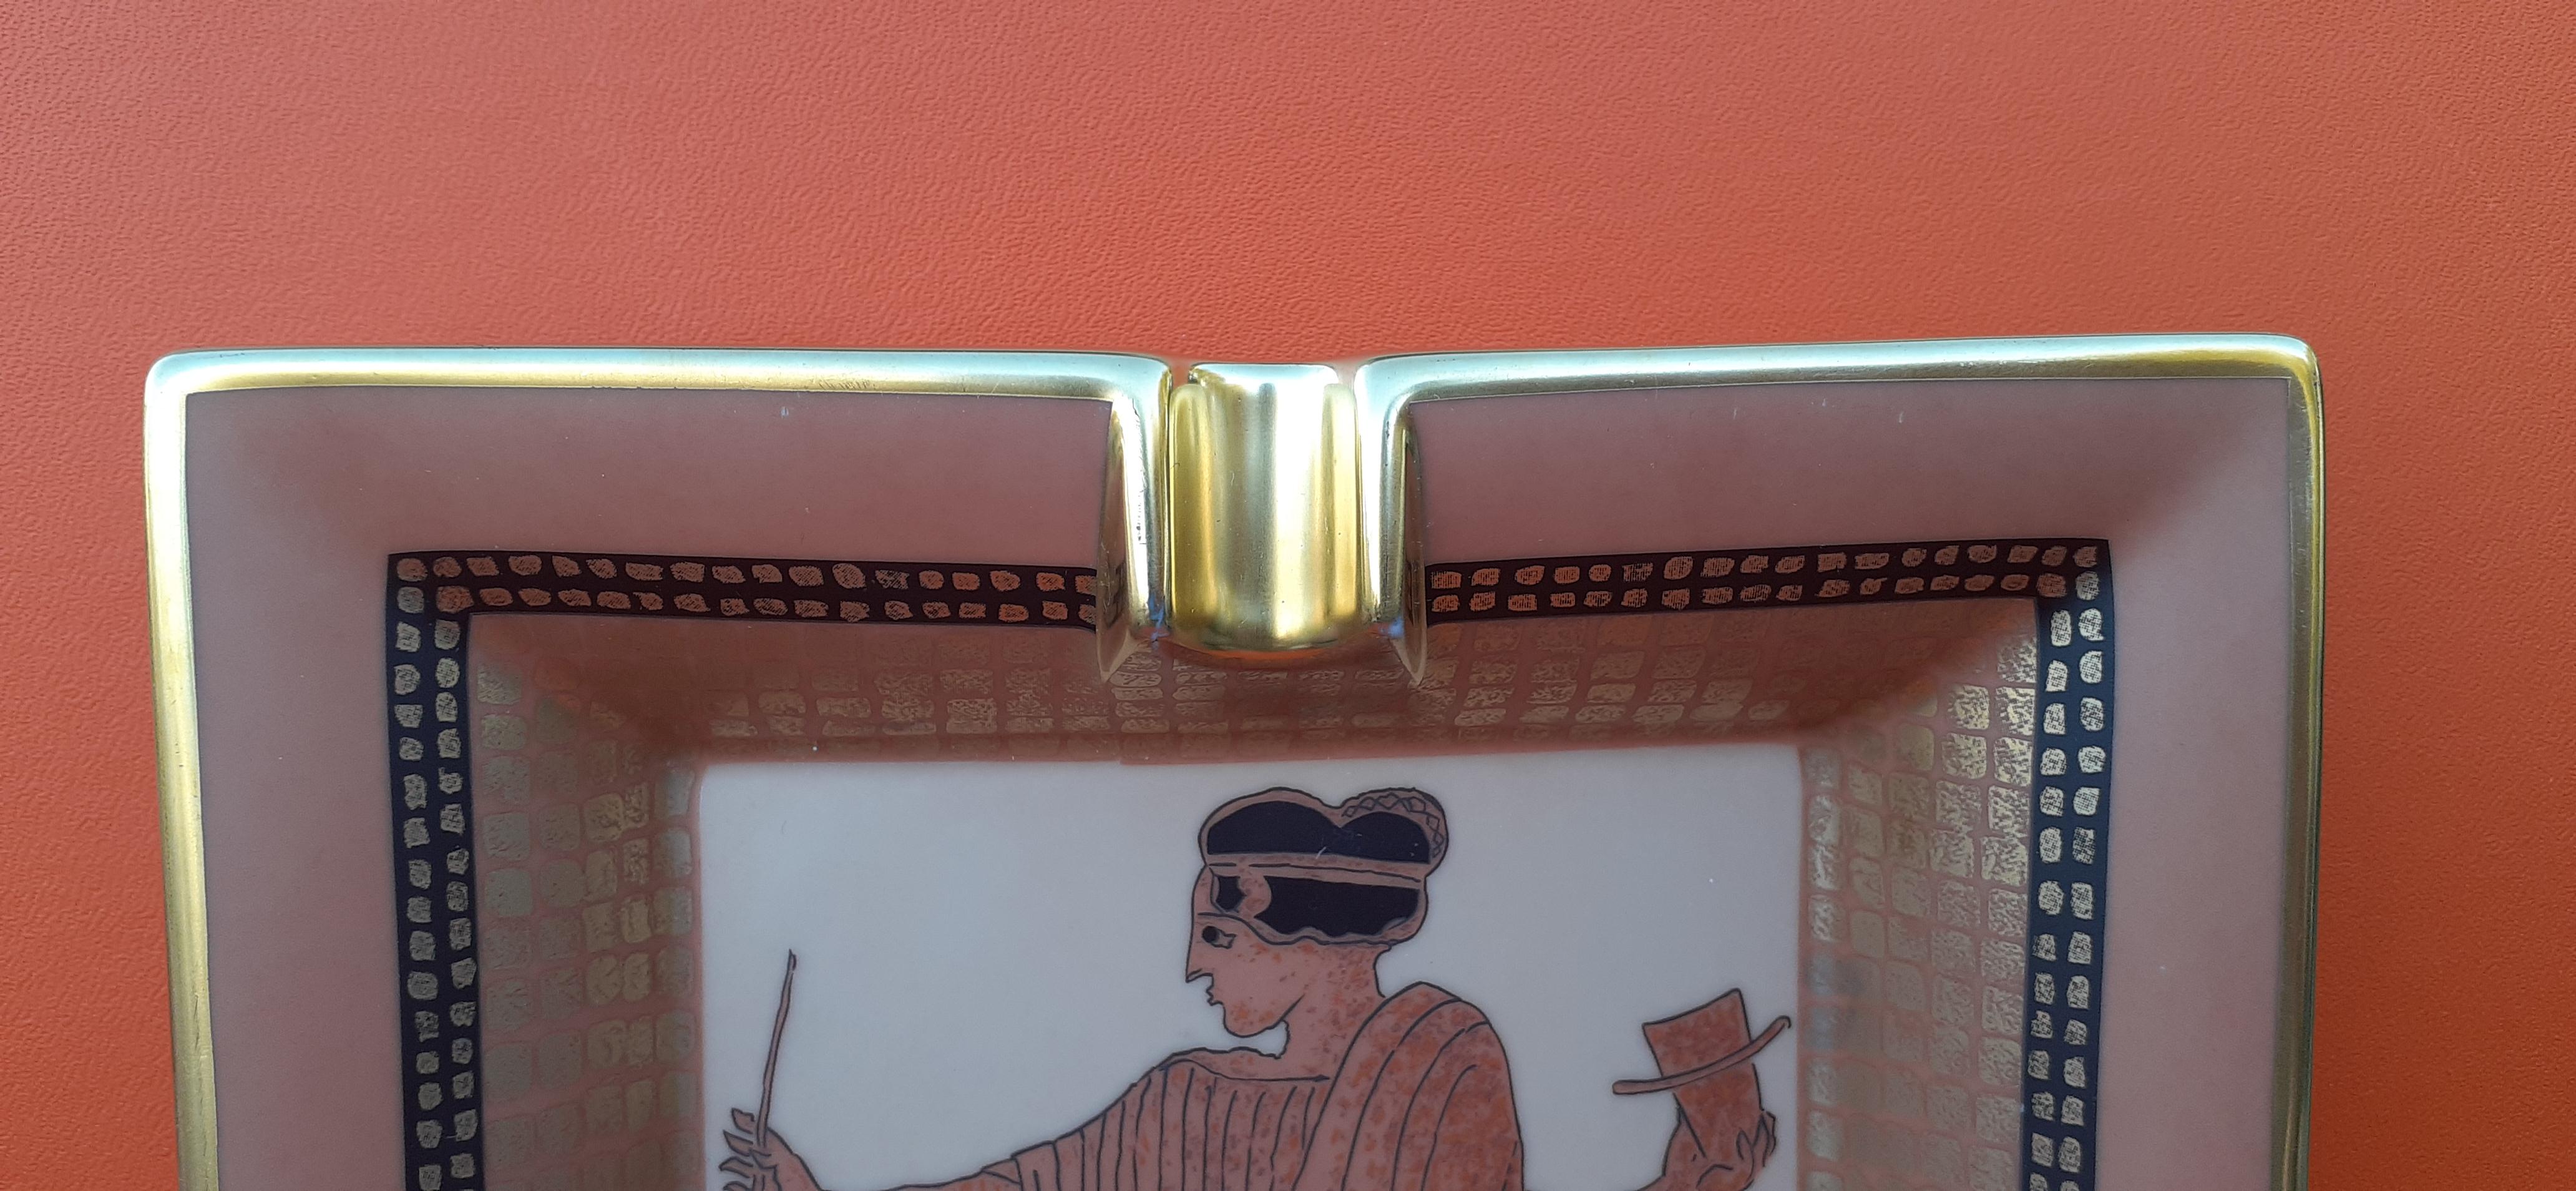 Beautiful and Rare Authentic Hermès Ashtray

Print: Greek Mythology Woman

Made in France

Made of Porcelain with golden edges

Colorways: Beige, Light Brown, Black, Golden

Beige suede leather at back

